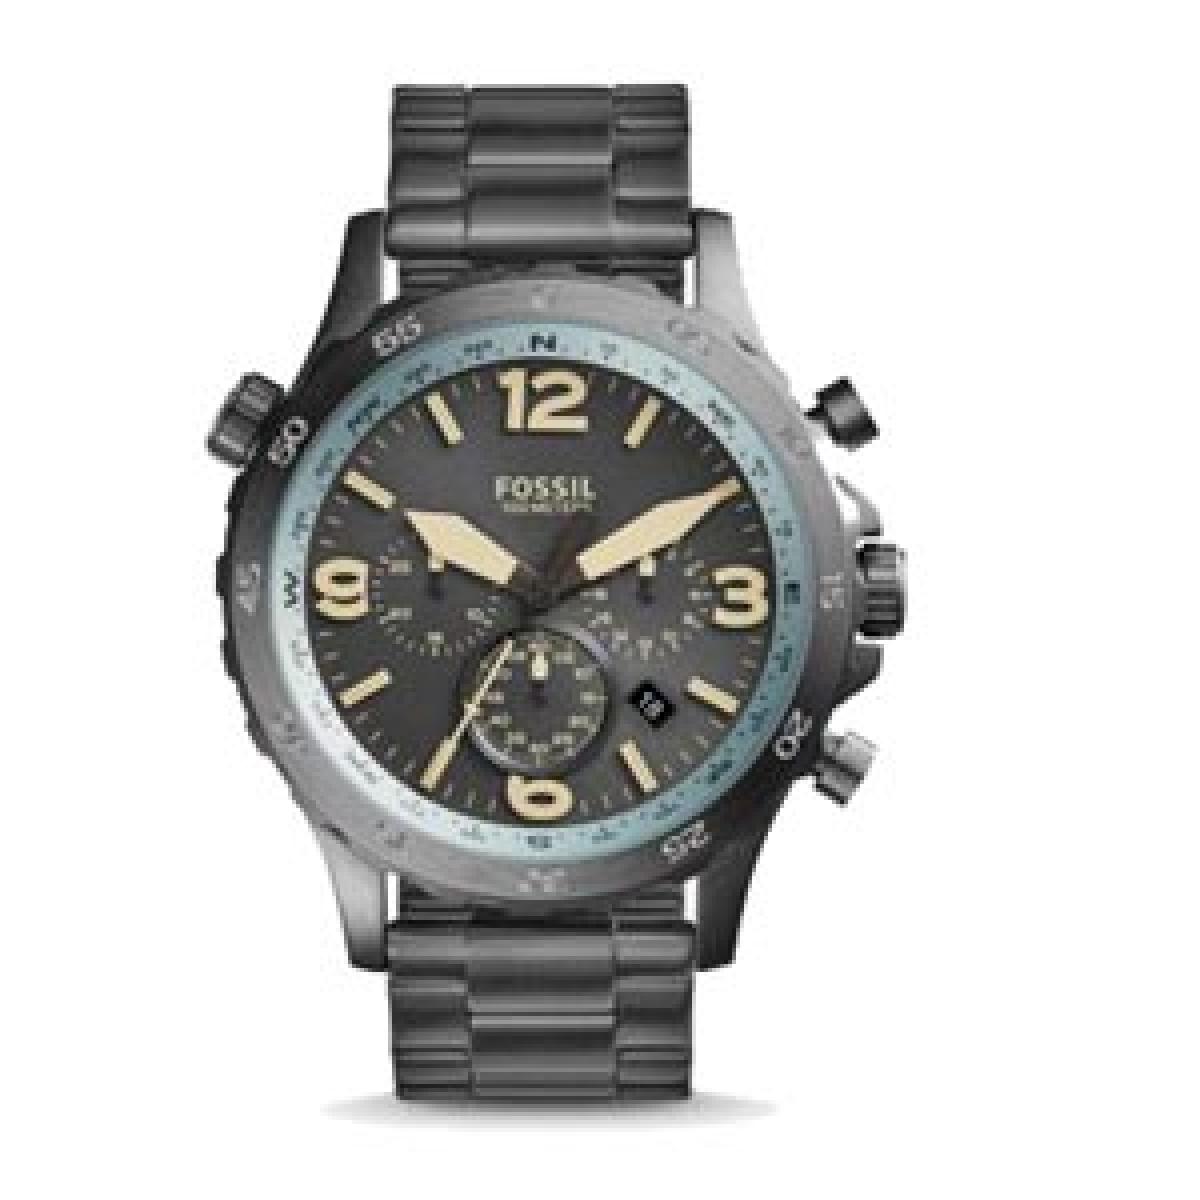 Fossil introduces the Mineral Blue Range of Timepieces 